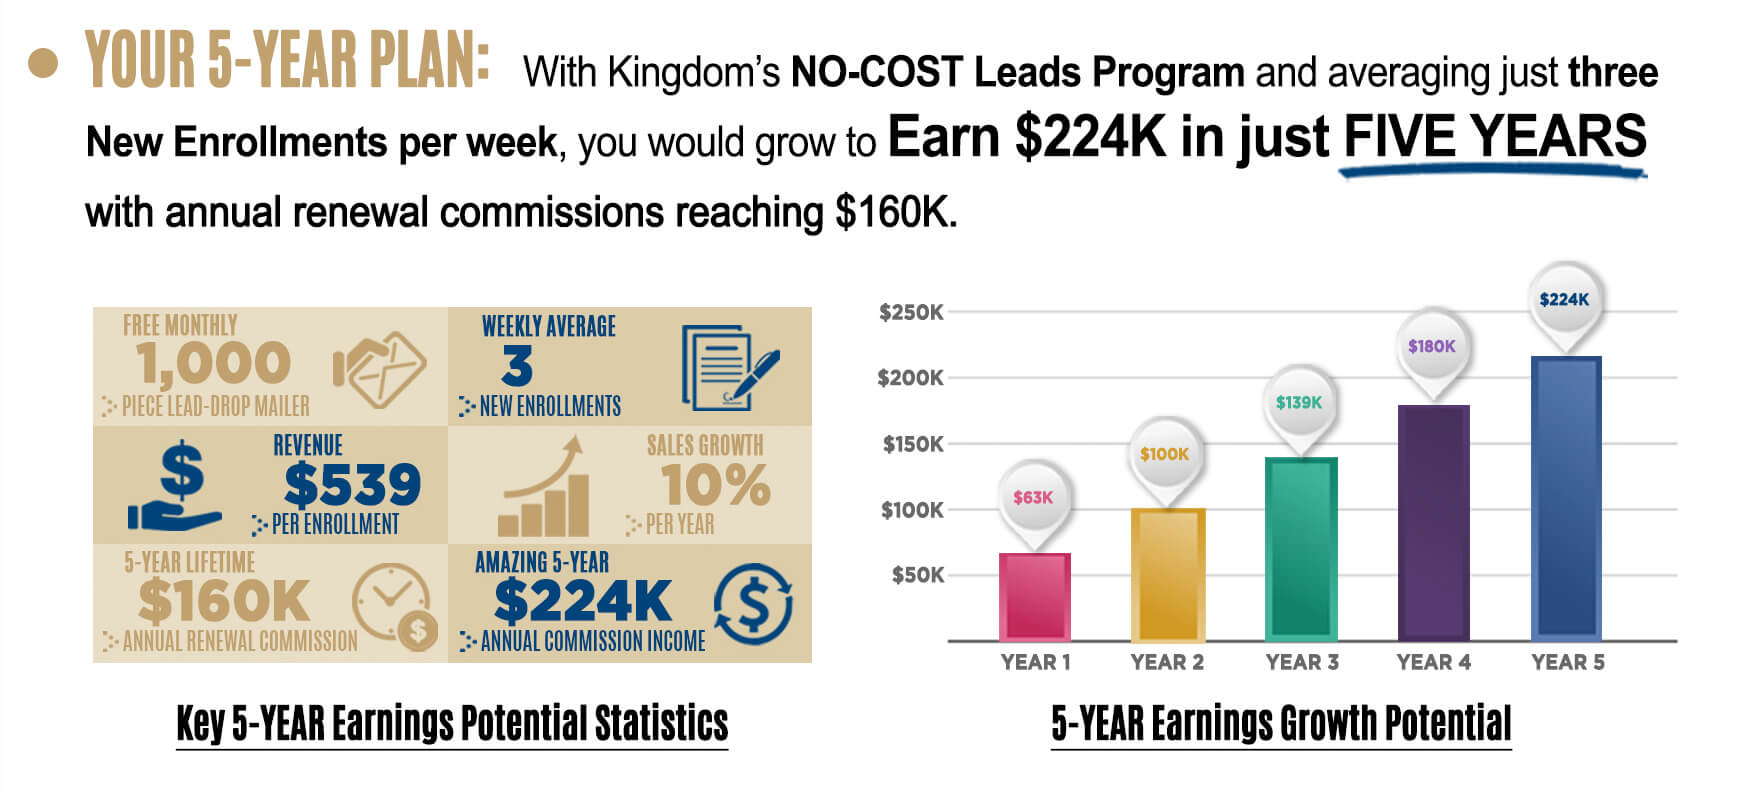 Your 5-year Plan: With Kingdom’s no-cost leads program and averaging just three new enrollments per week, you would grow to earn $224,000 in just five years with annual renewal commissions reaching $160,000.